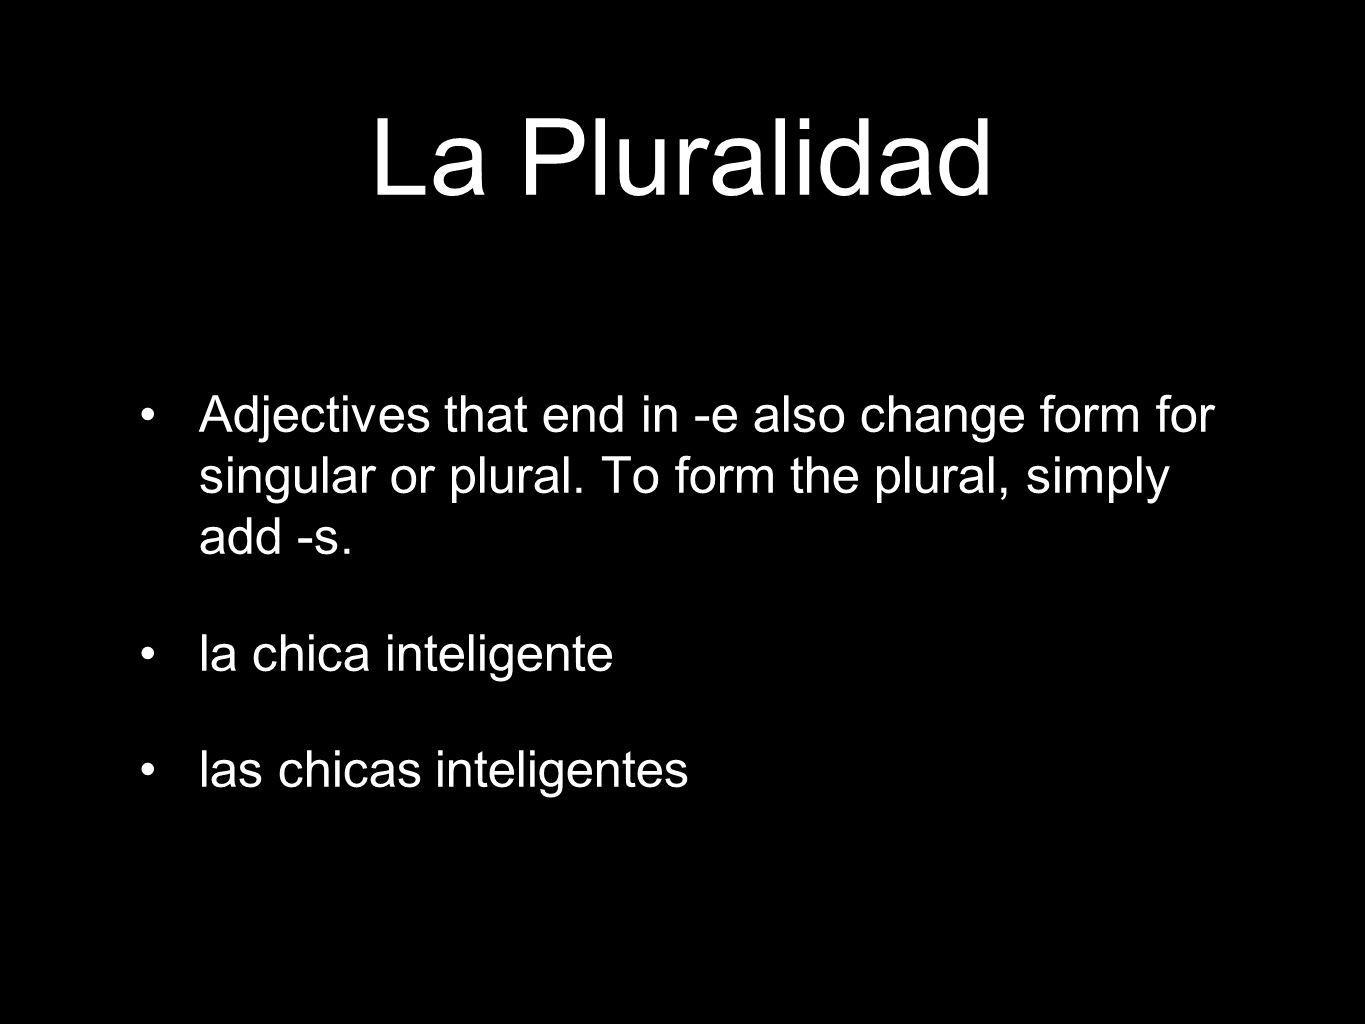 La Pluralidad Adjectives that end in -e also change form for singular or plural.